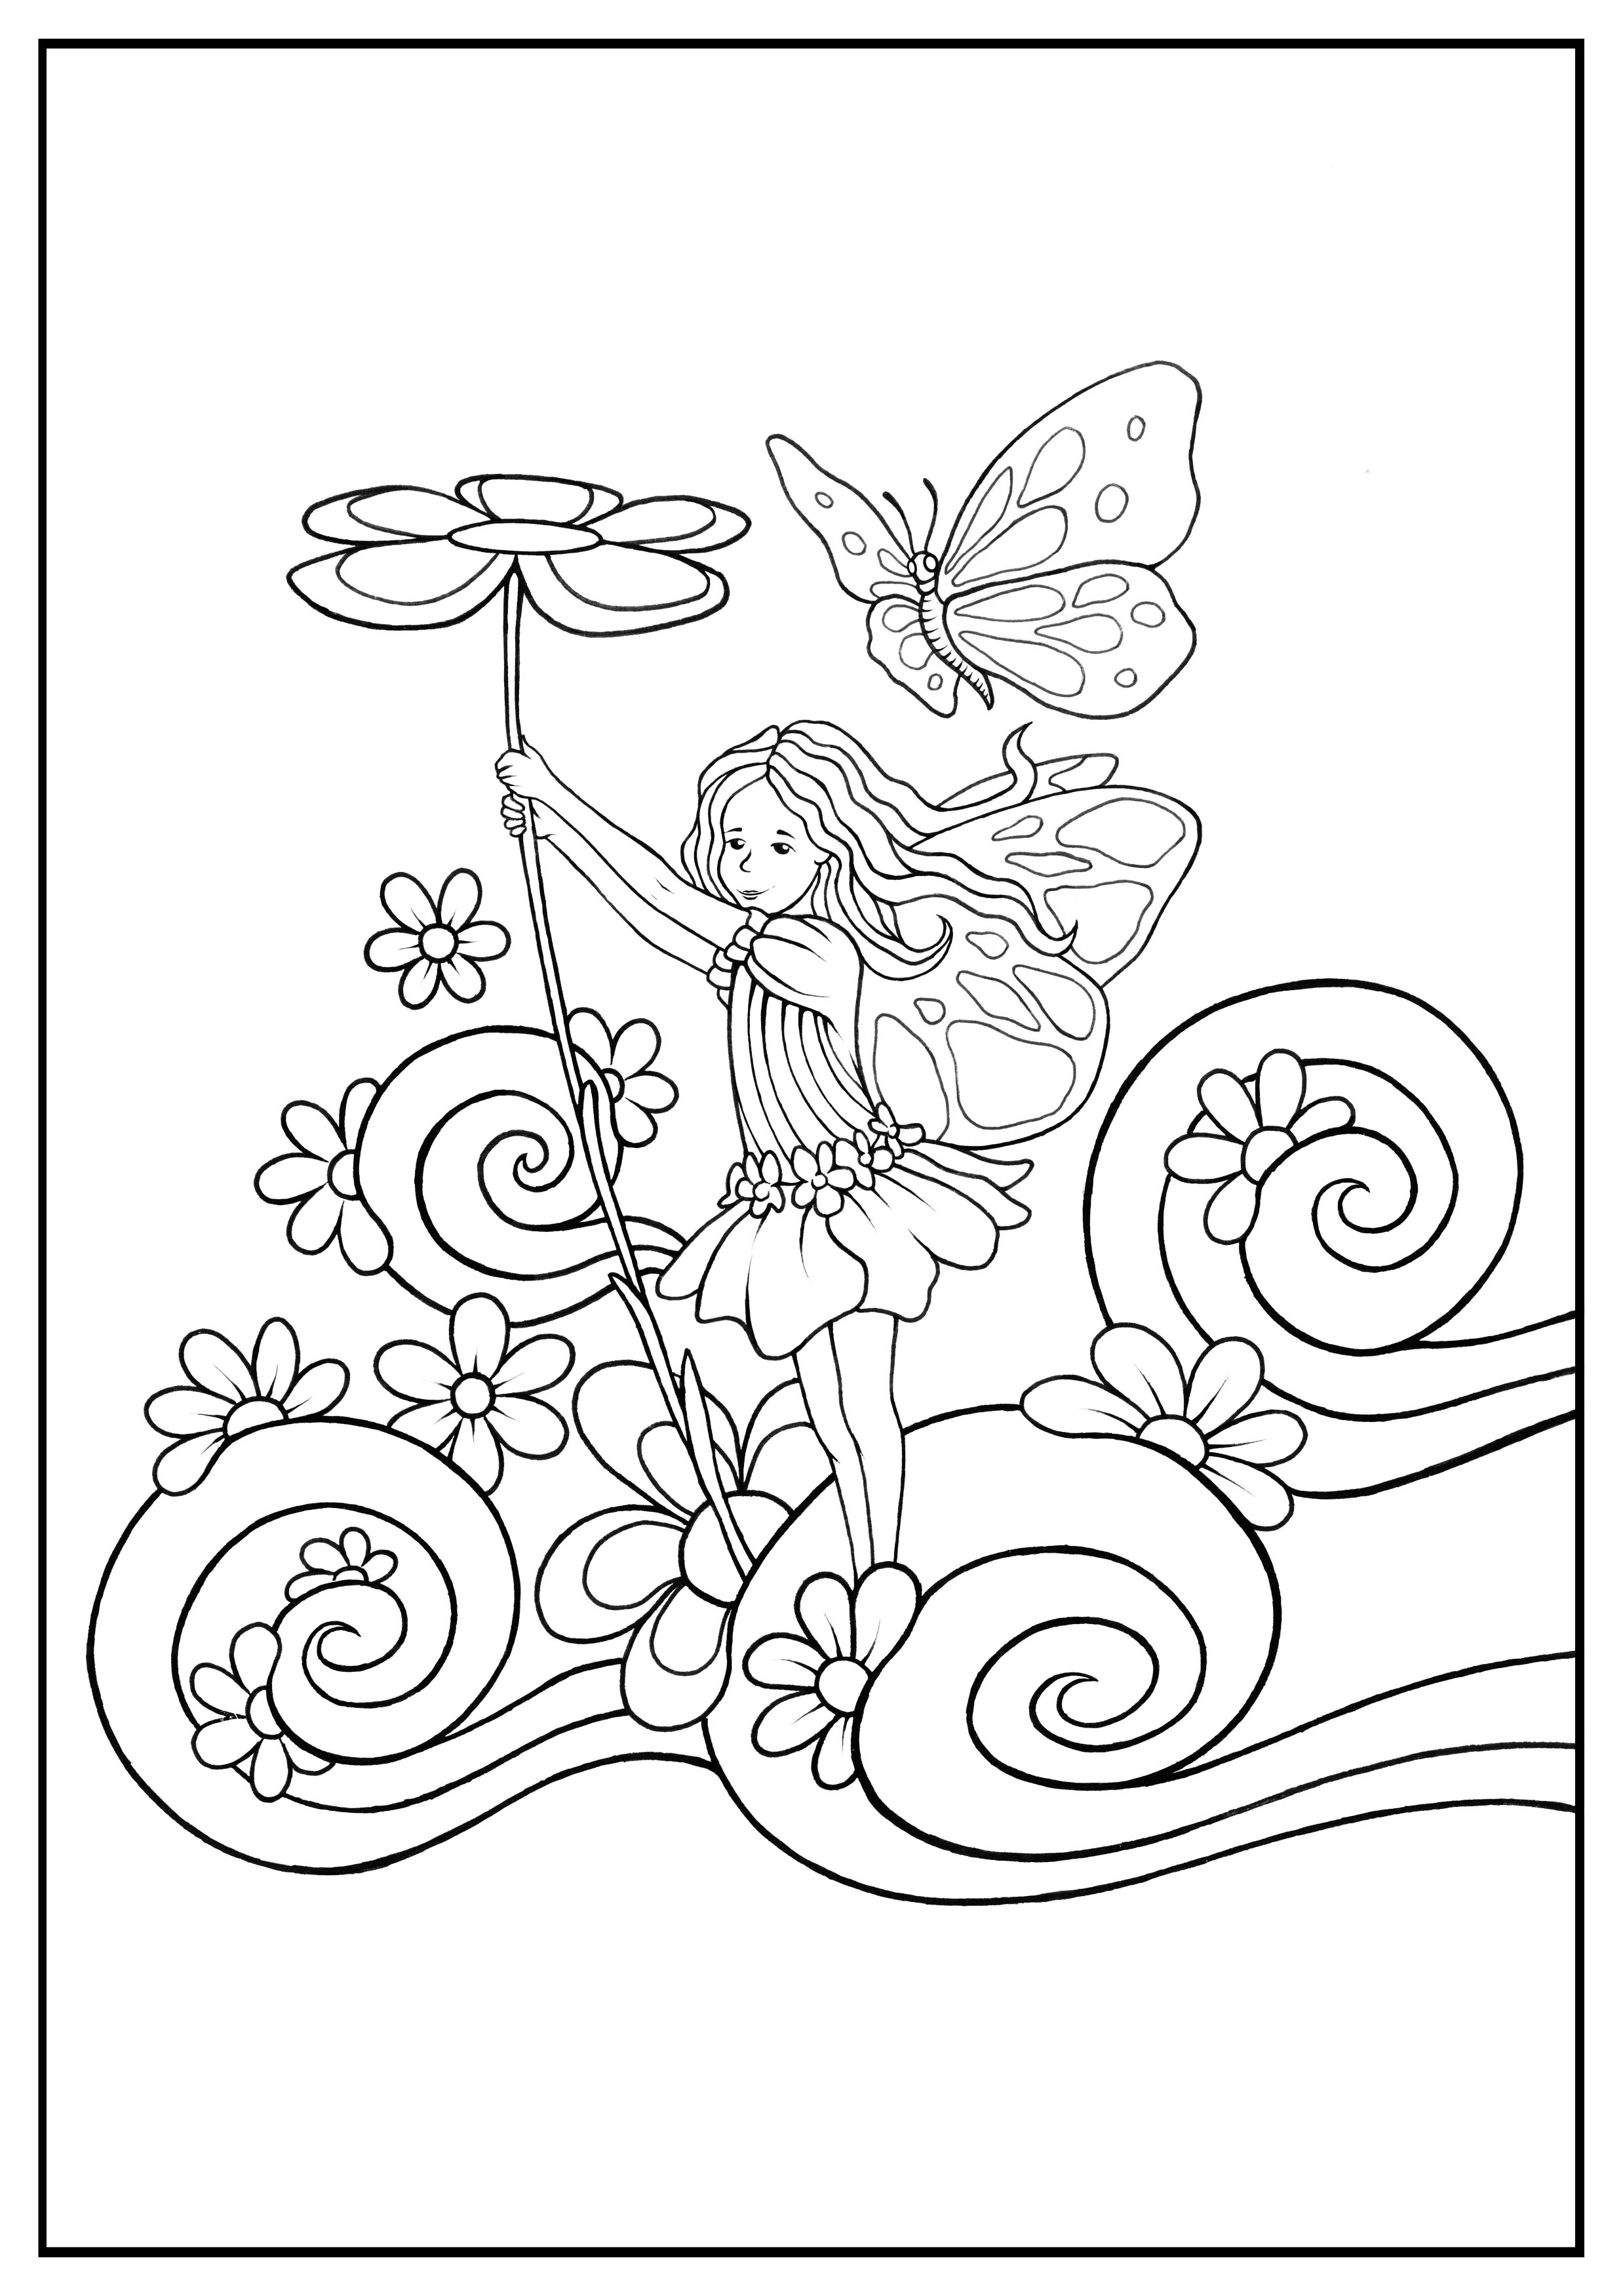 fairy-to-download-fairy-kids-coloring-pages